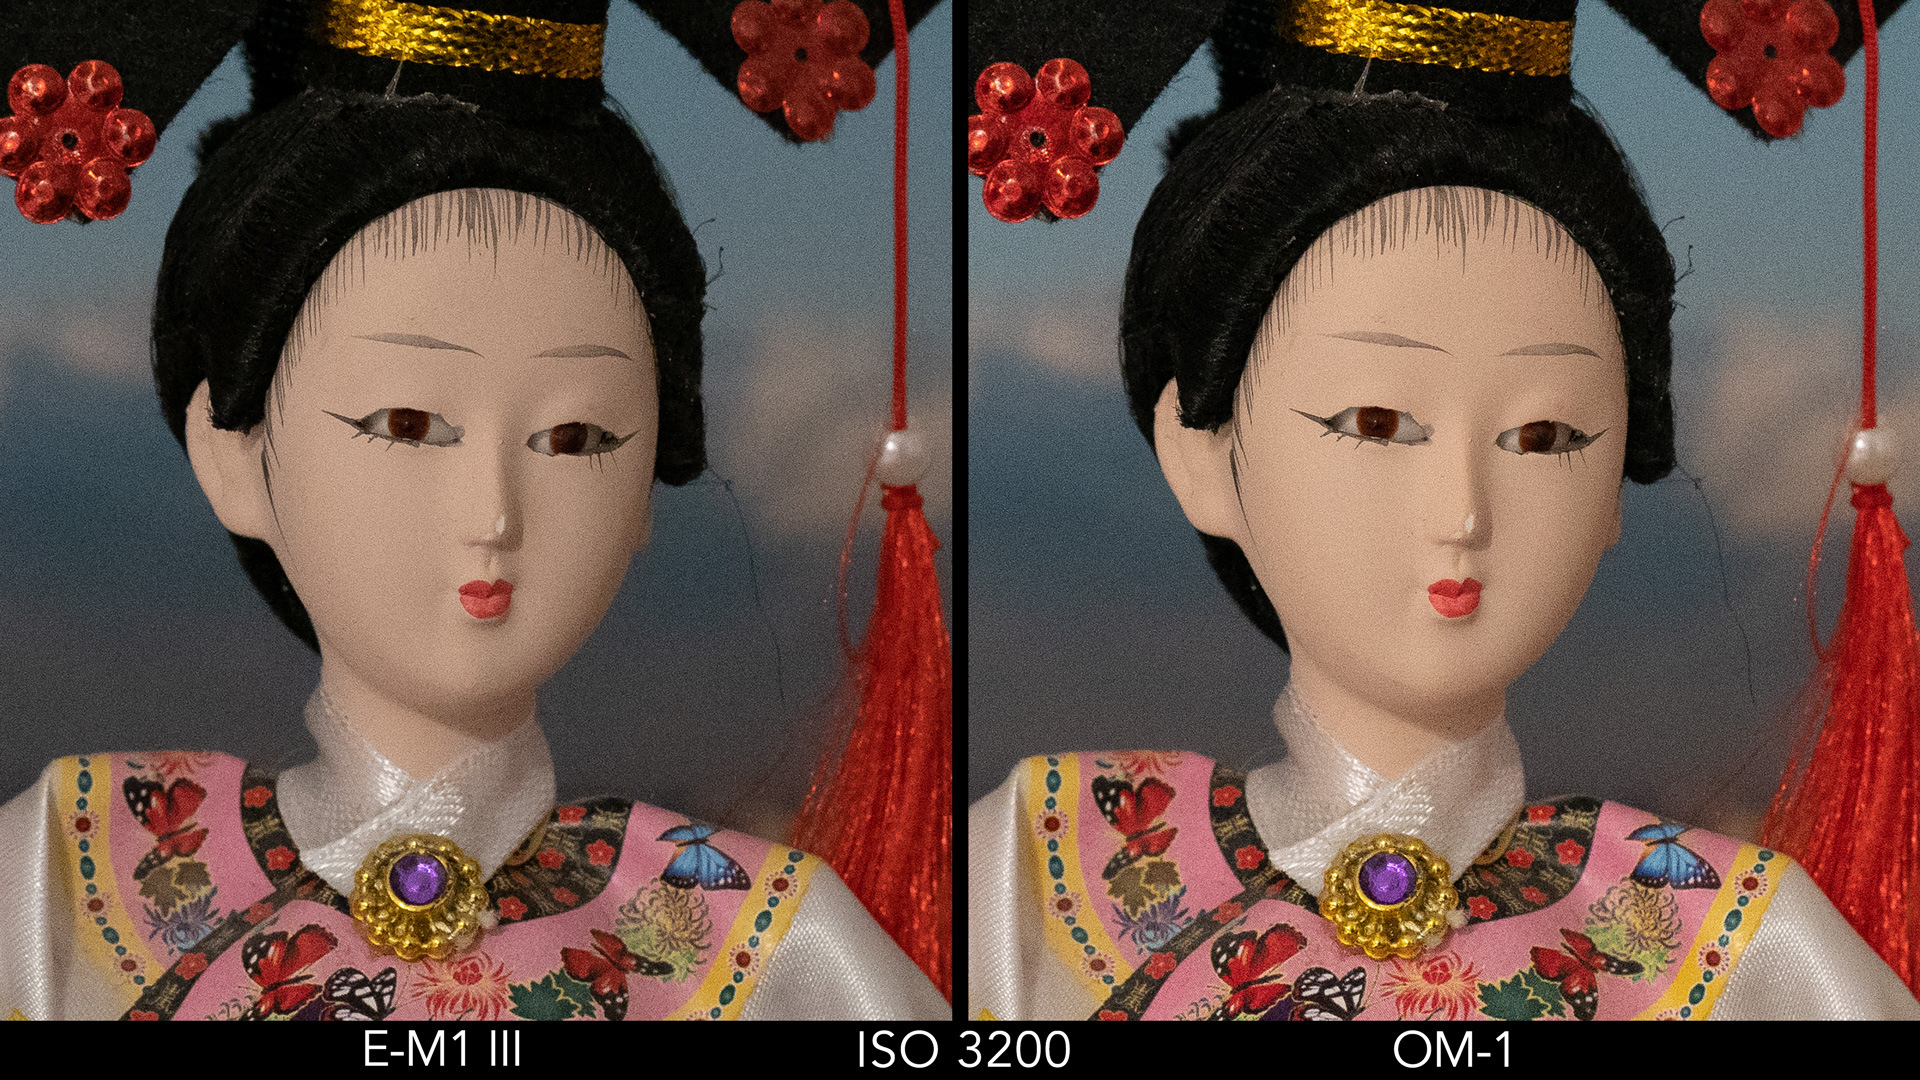 side by side image of a Japanese doll comparing ISO 3200 for the E-M1 III and OM-1